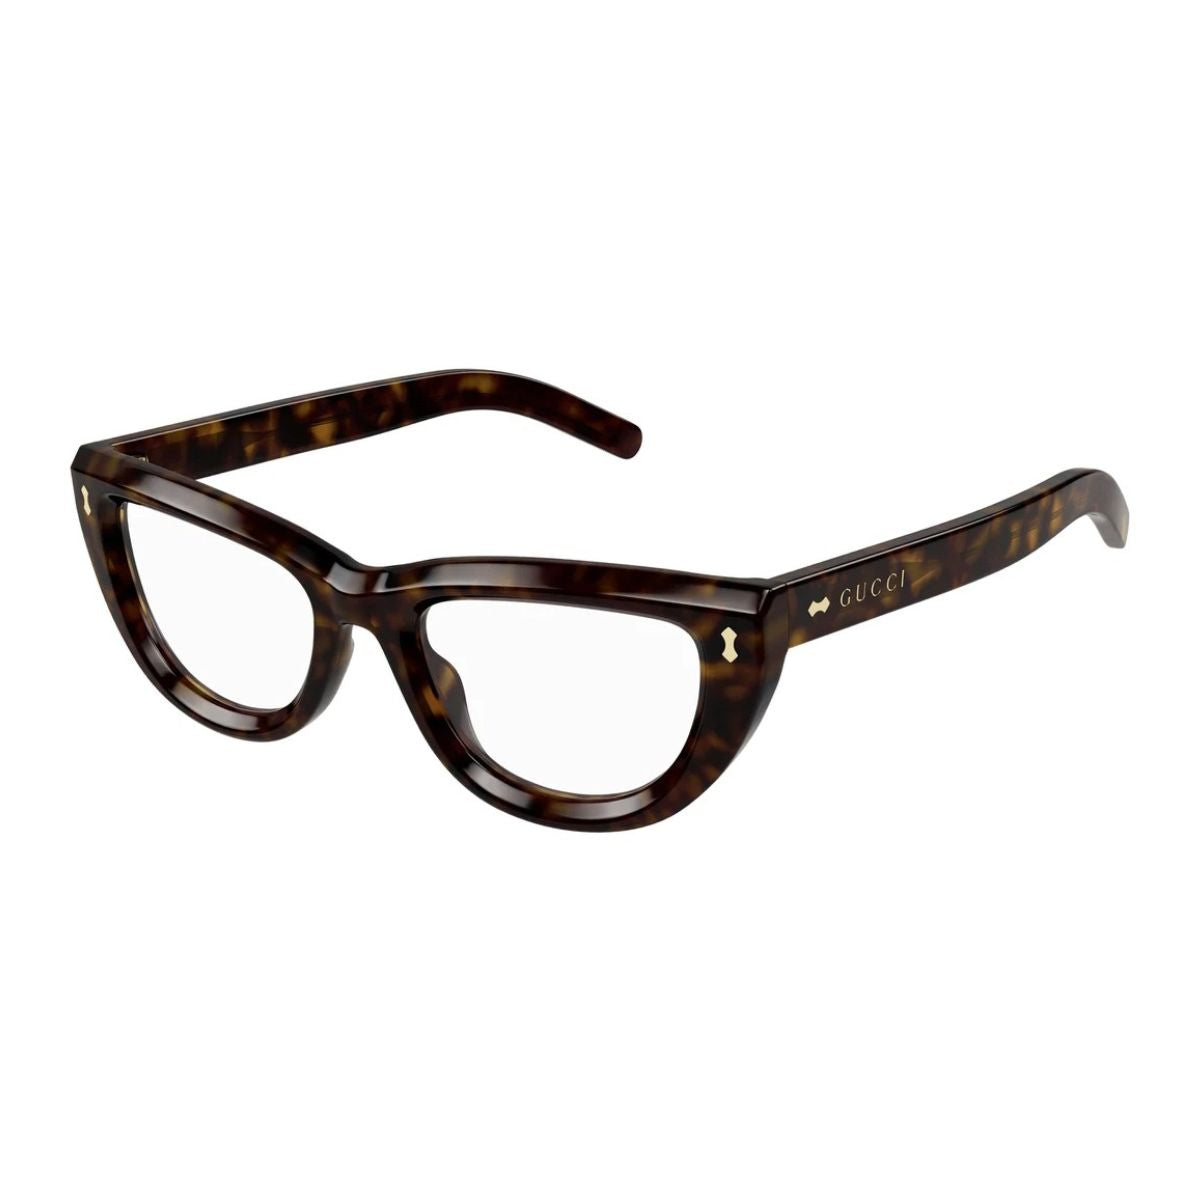 "Fashionable Gucci Eyewear - Model 1521O 002 frames combining style and sophistication seamlessly."